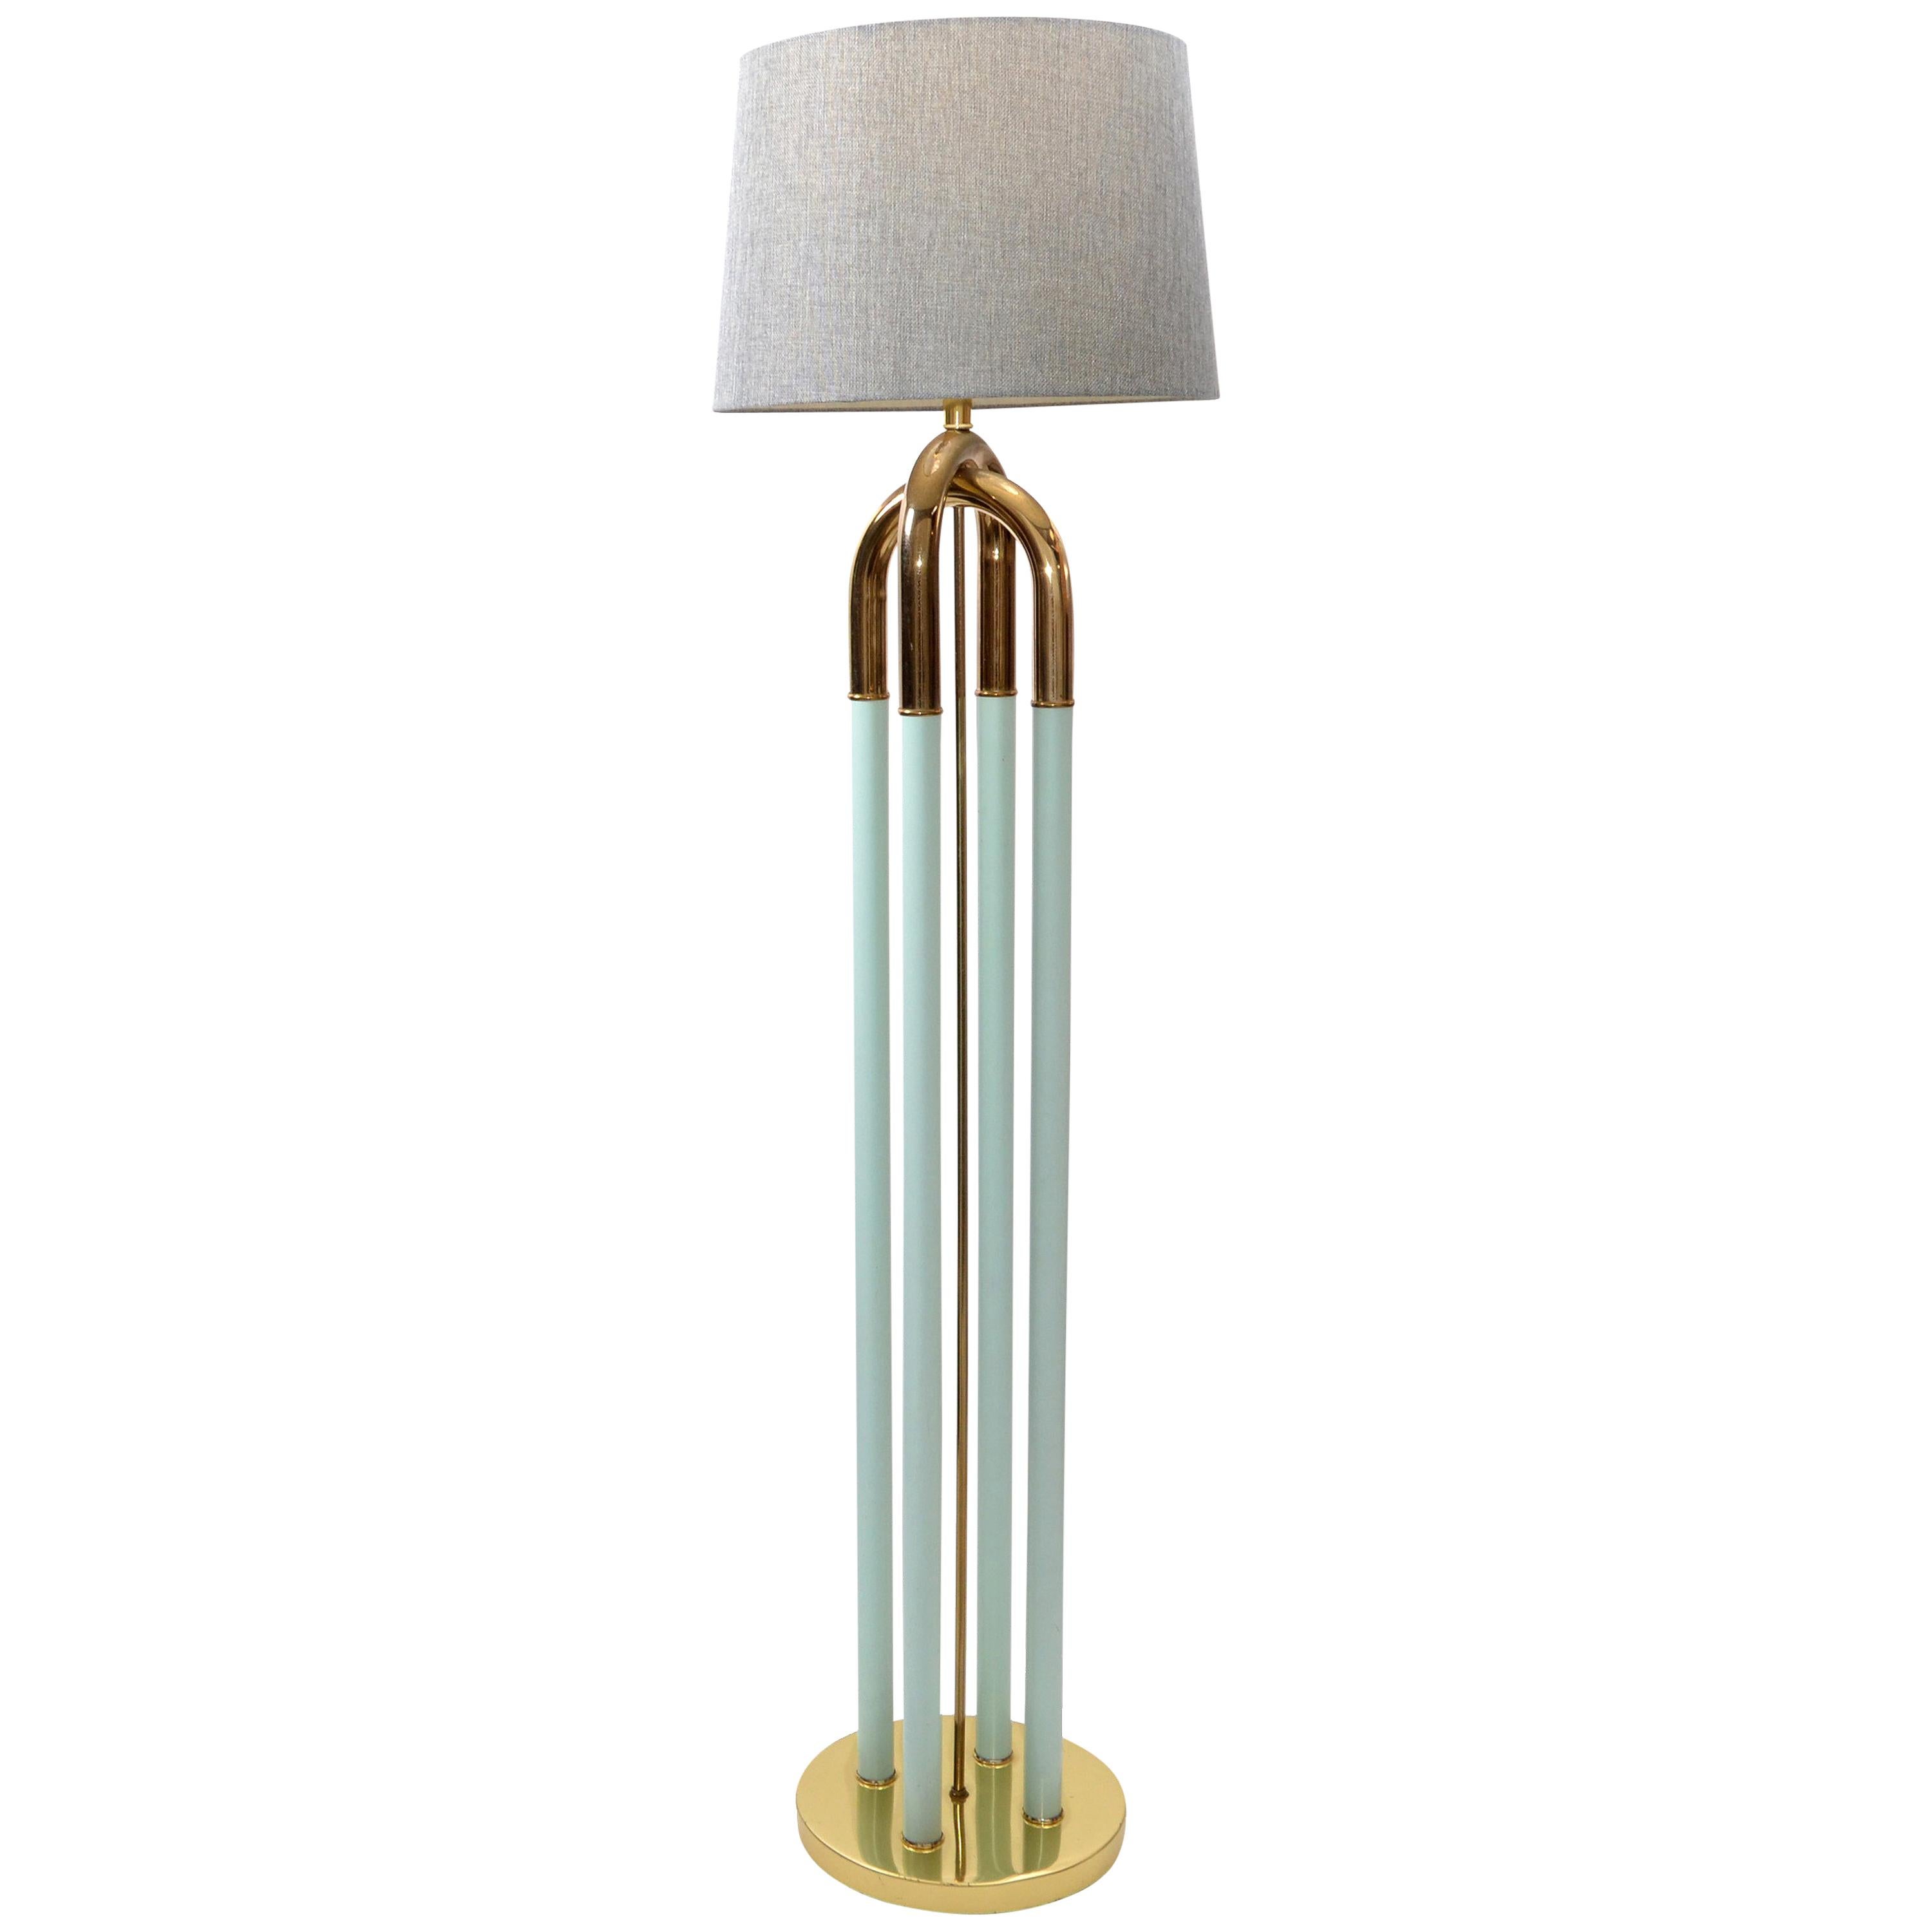 Mid-Century Modern Brass-Plated and Turquoise Enamel Finish Floor Lamp